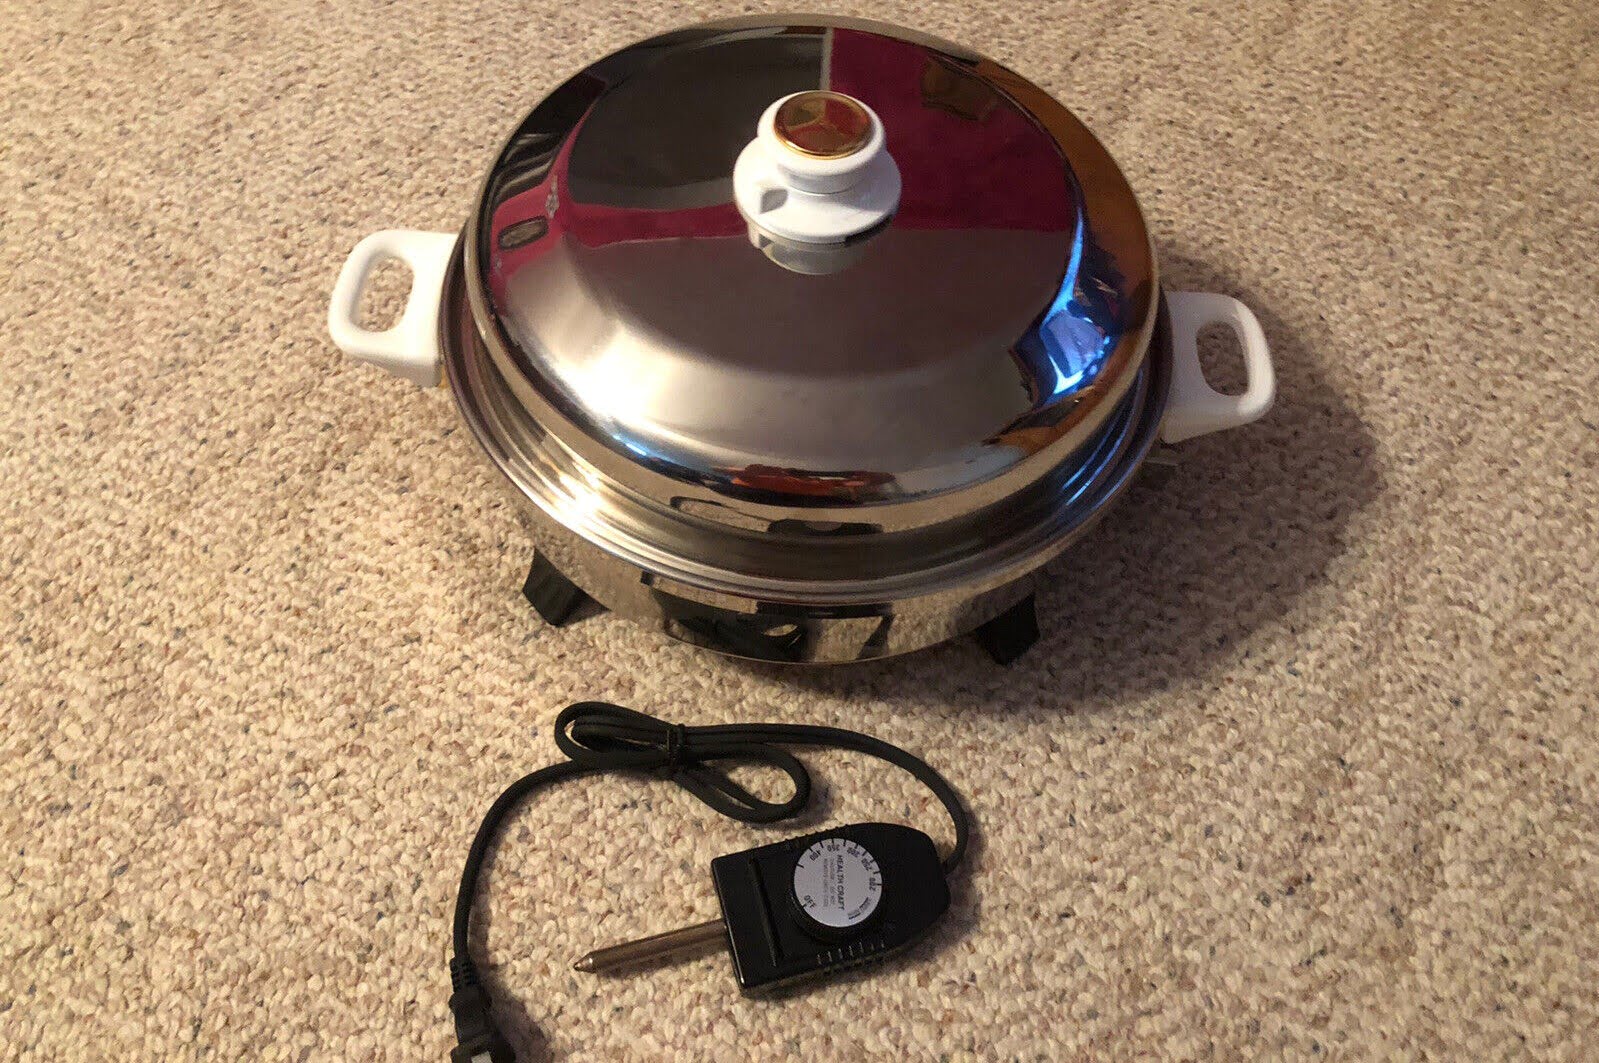 How To Use Healthcraft Electric Skillet